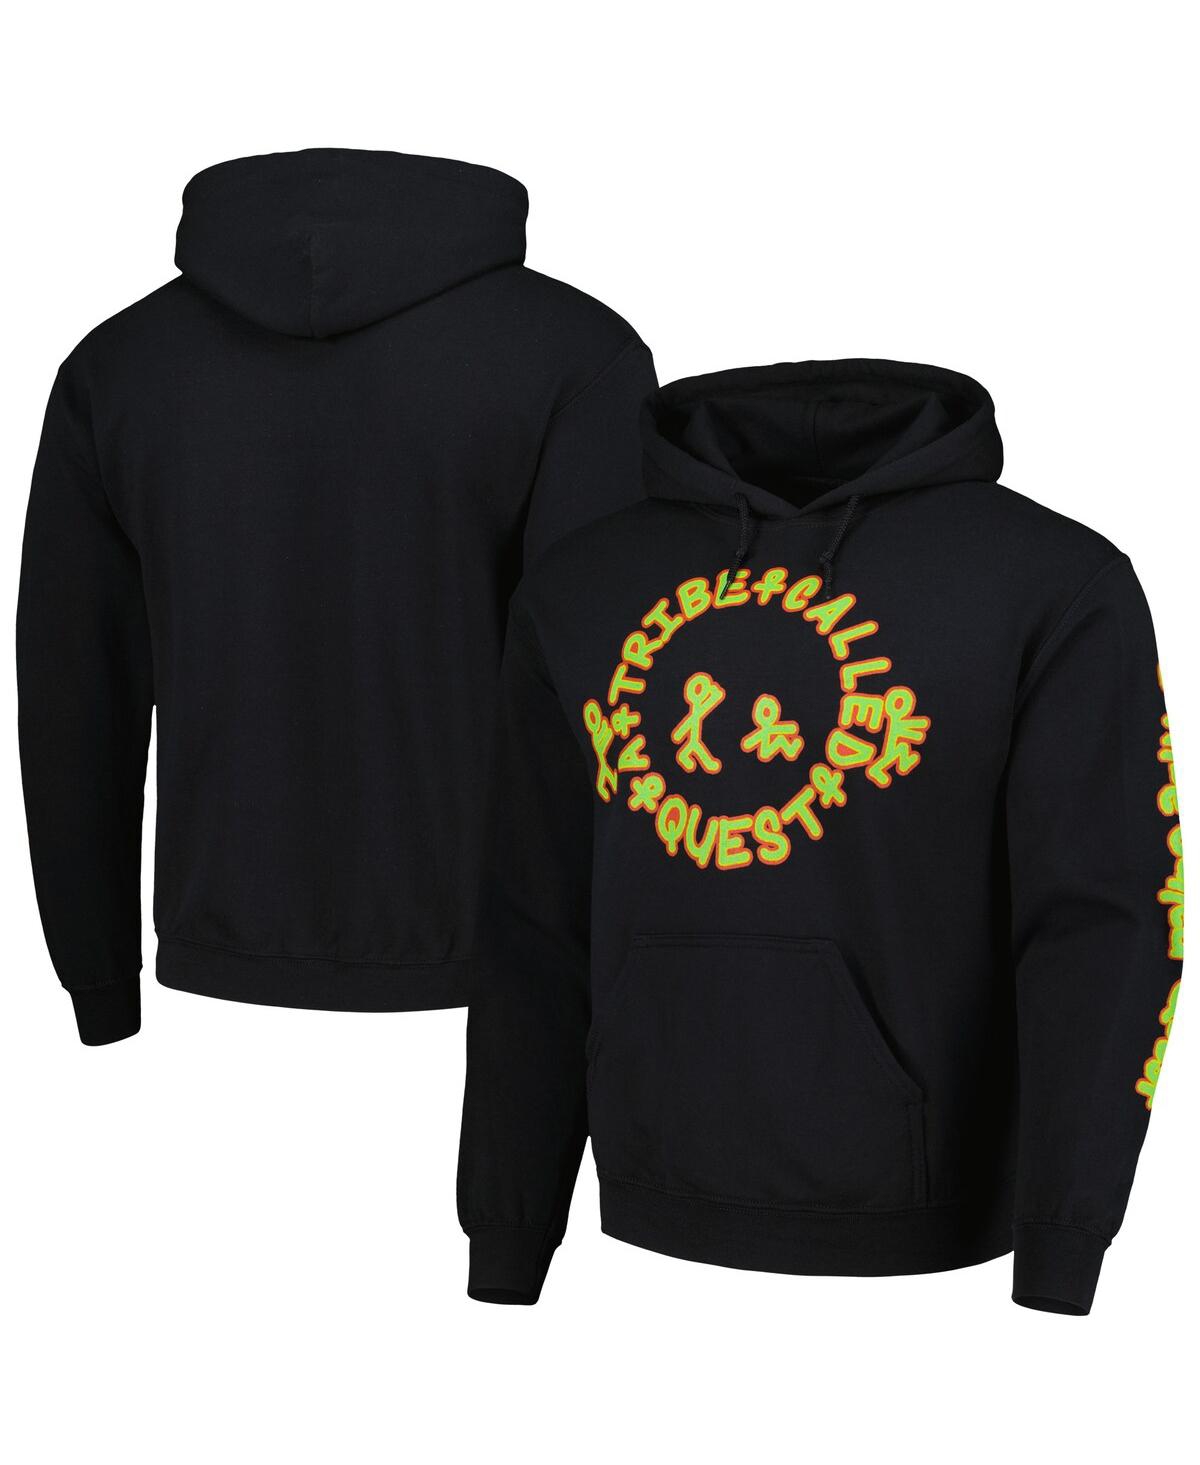 Men's and Women's A Tribe Called Quest Black Graphic Pullover Hoodie - Black